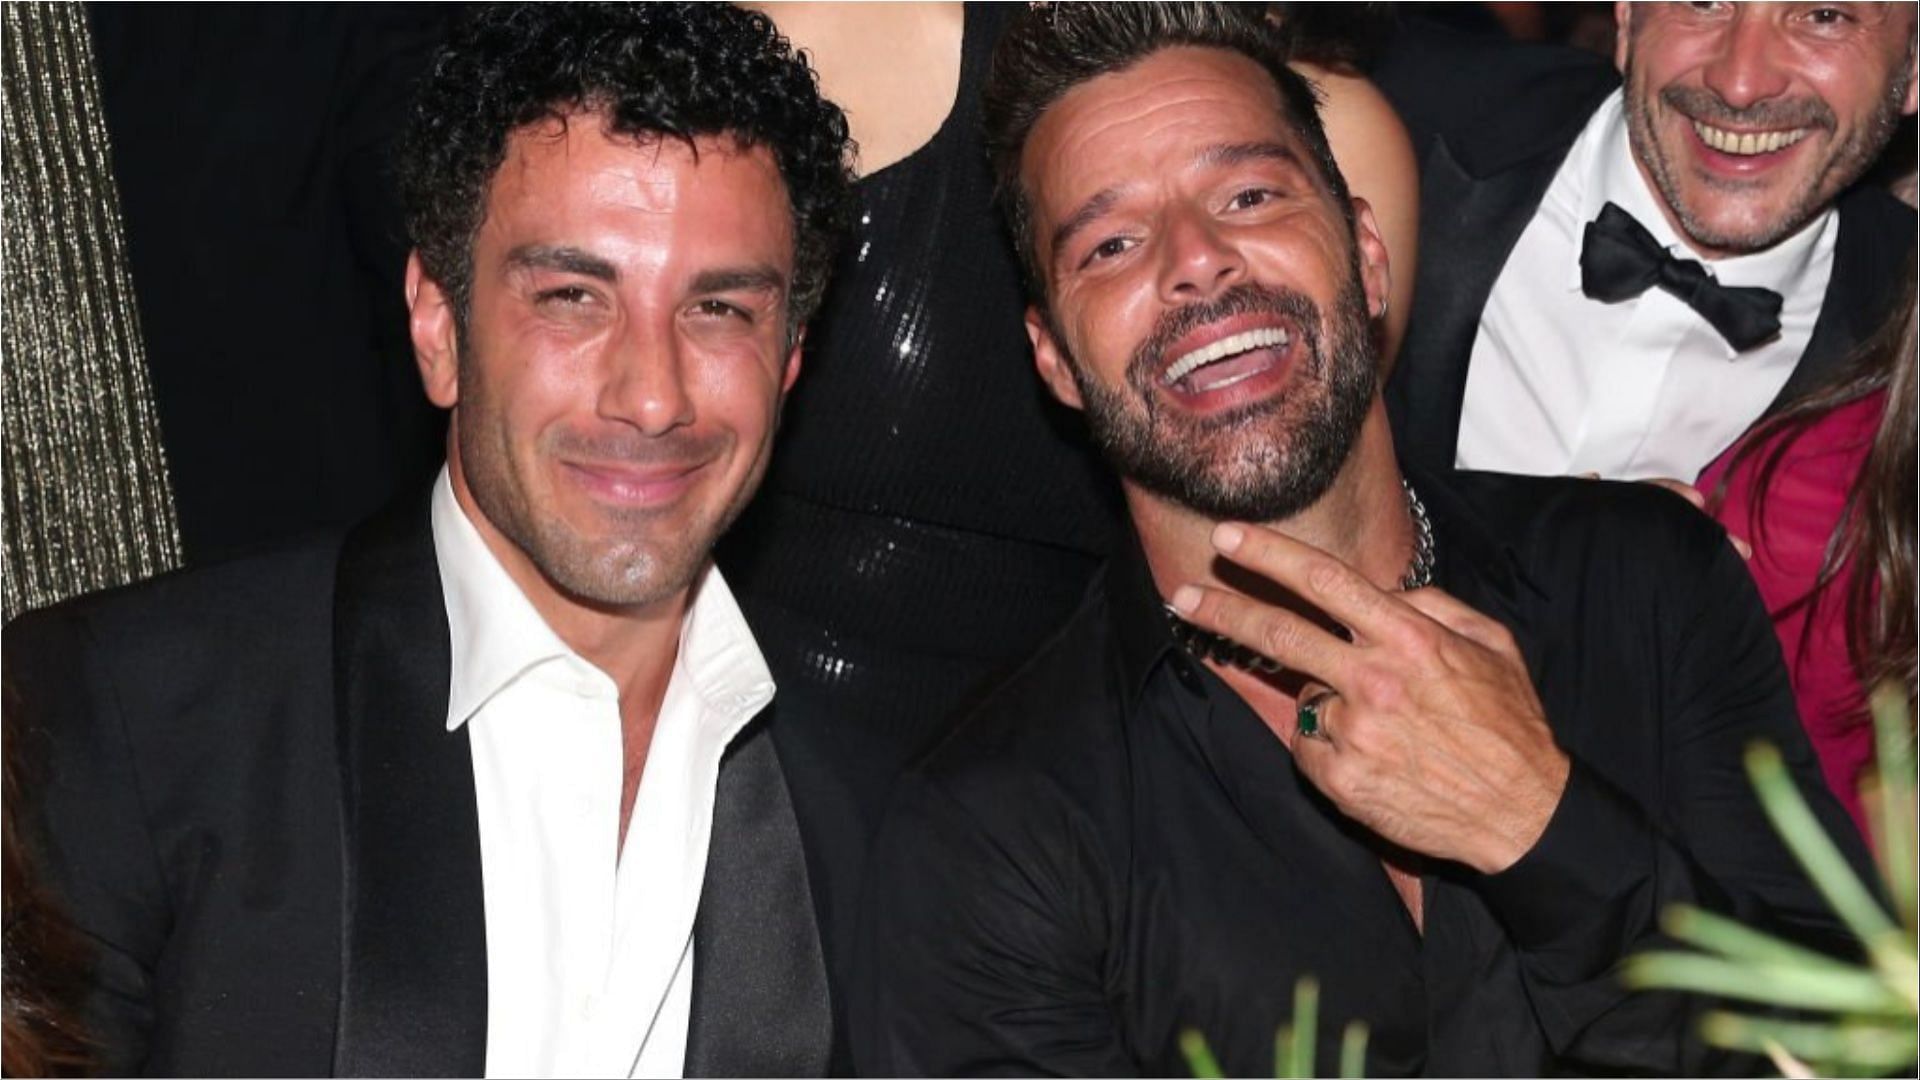 Ricky Martin and Jwan Yosef have recently announced they are getting divorced (Image via Gisela Schober/Getty Images)